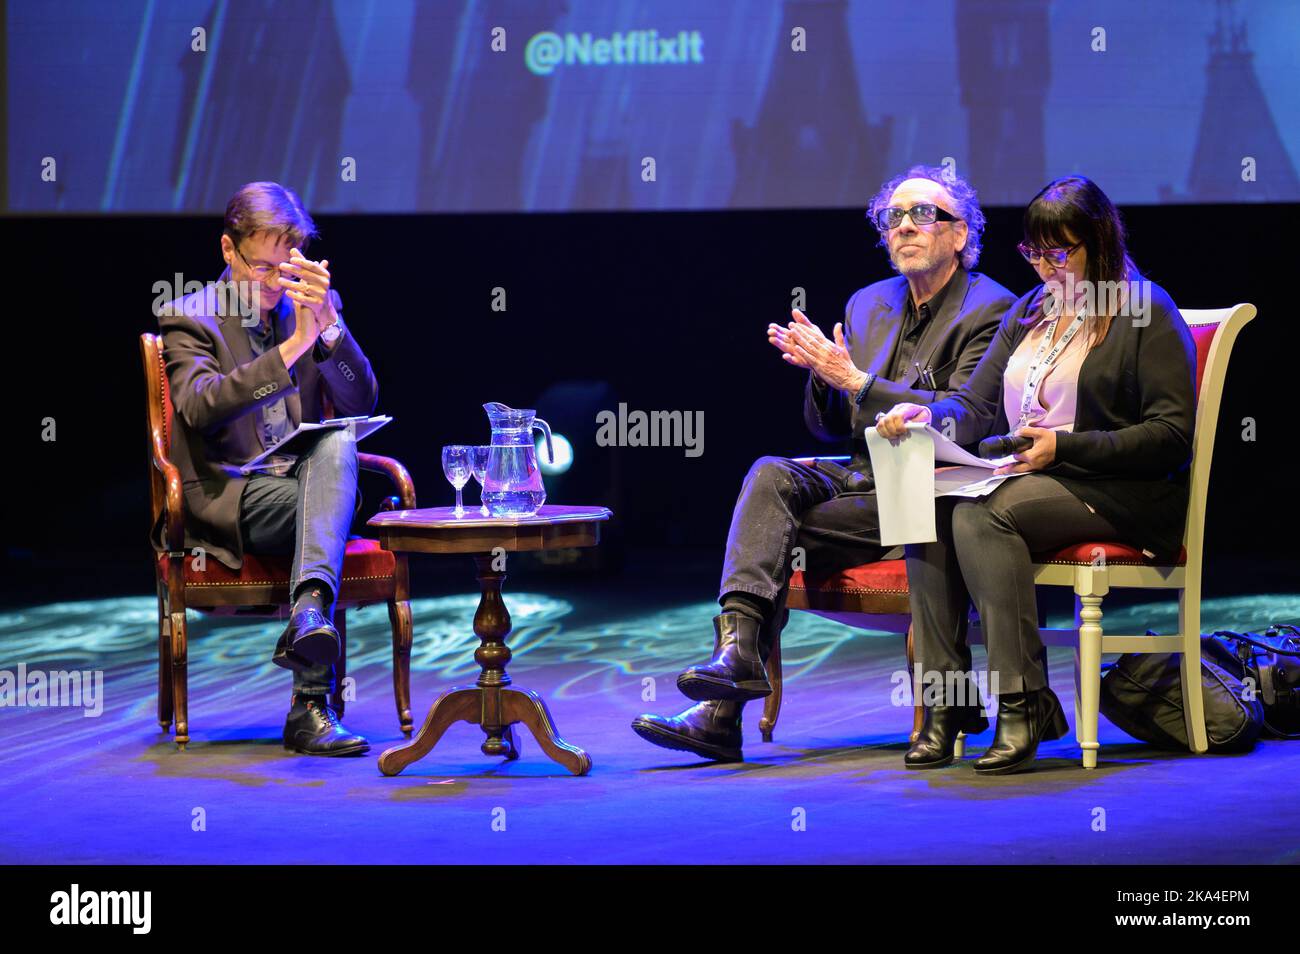 Lucca, Italy. 31st Oct, 2022. Lucca, Italy - October 31, 2022: Tim Burton presents the European fan screening of the netflix TV series Wednesday at lucca comics and games. In the photo Tim Burton Credit: Stefano Dalle Luche/Alamy Live News Stock Photo